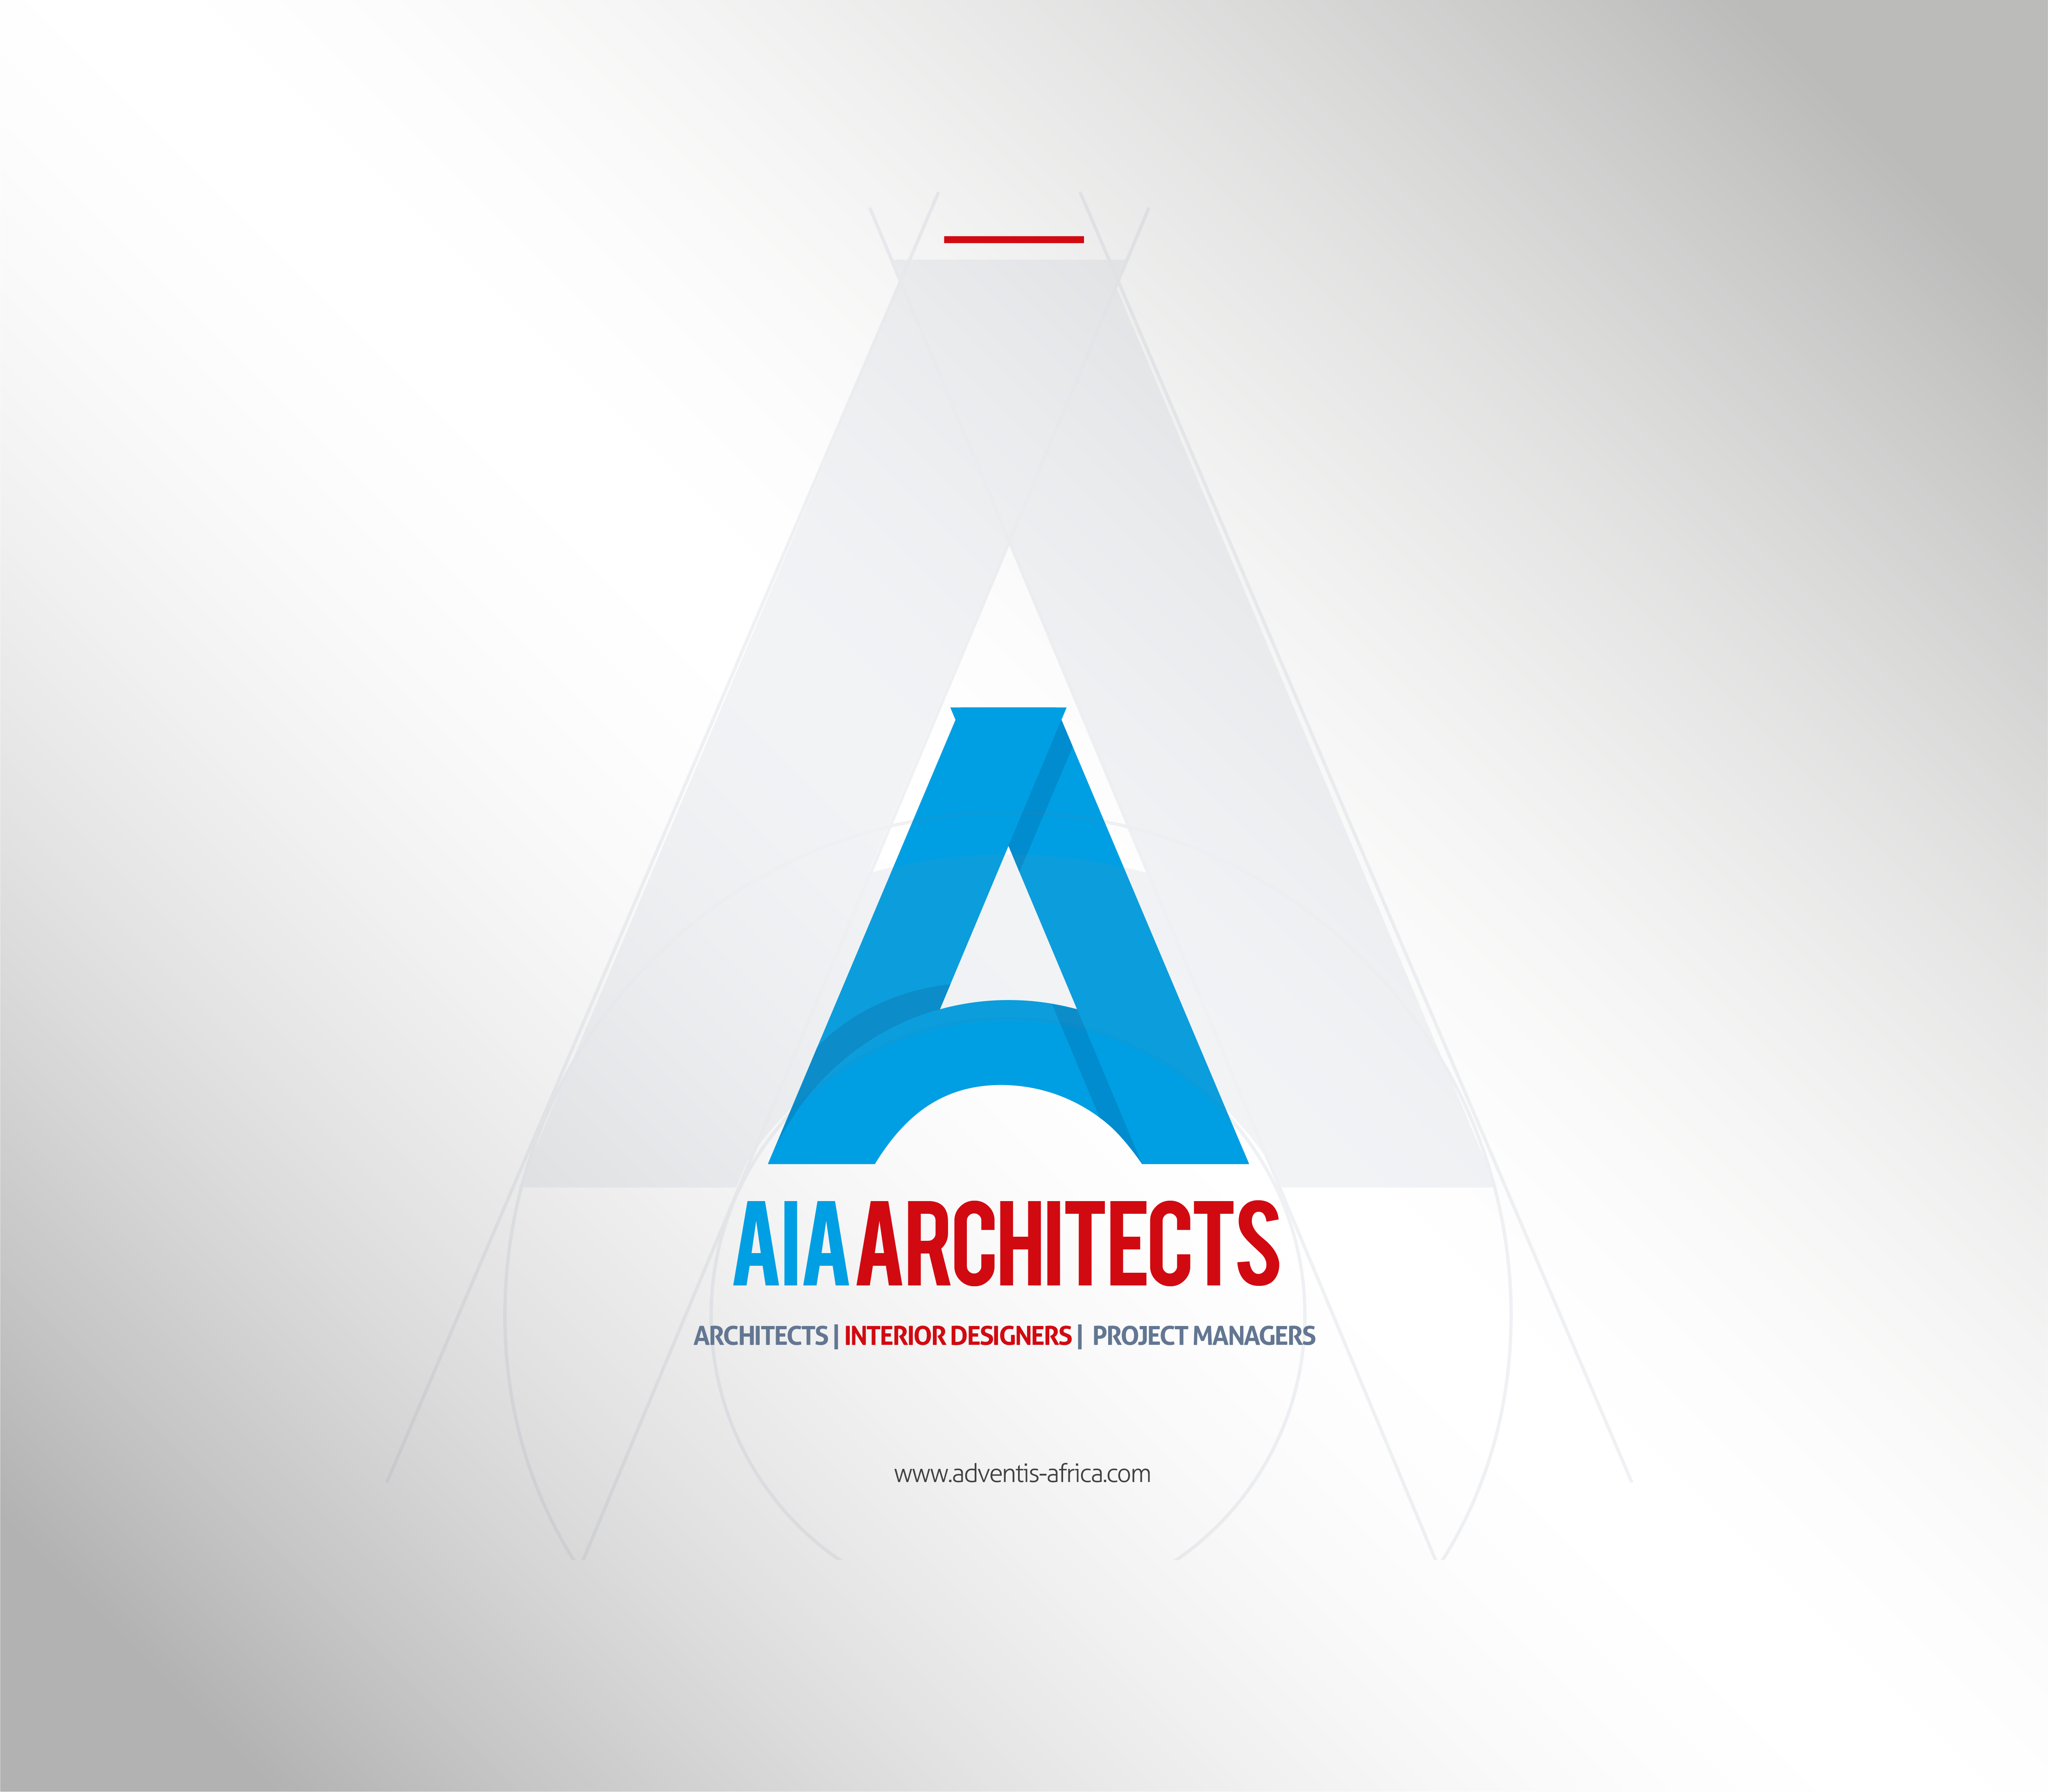 AIA Architects